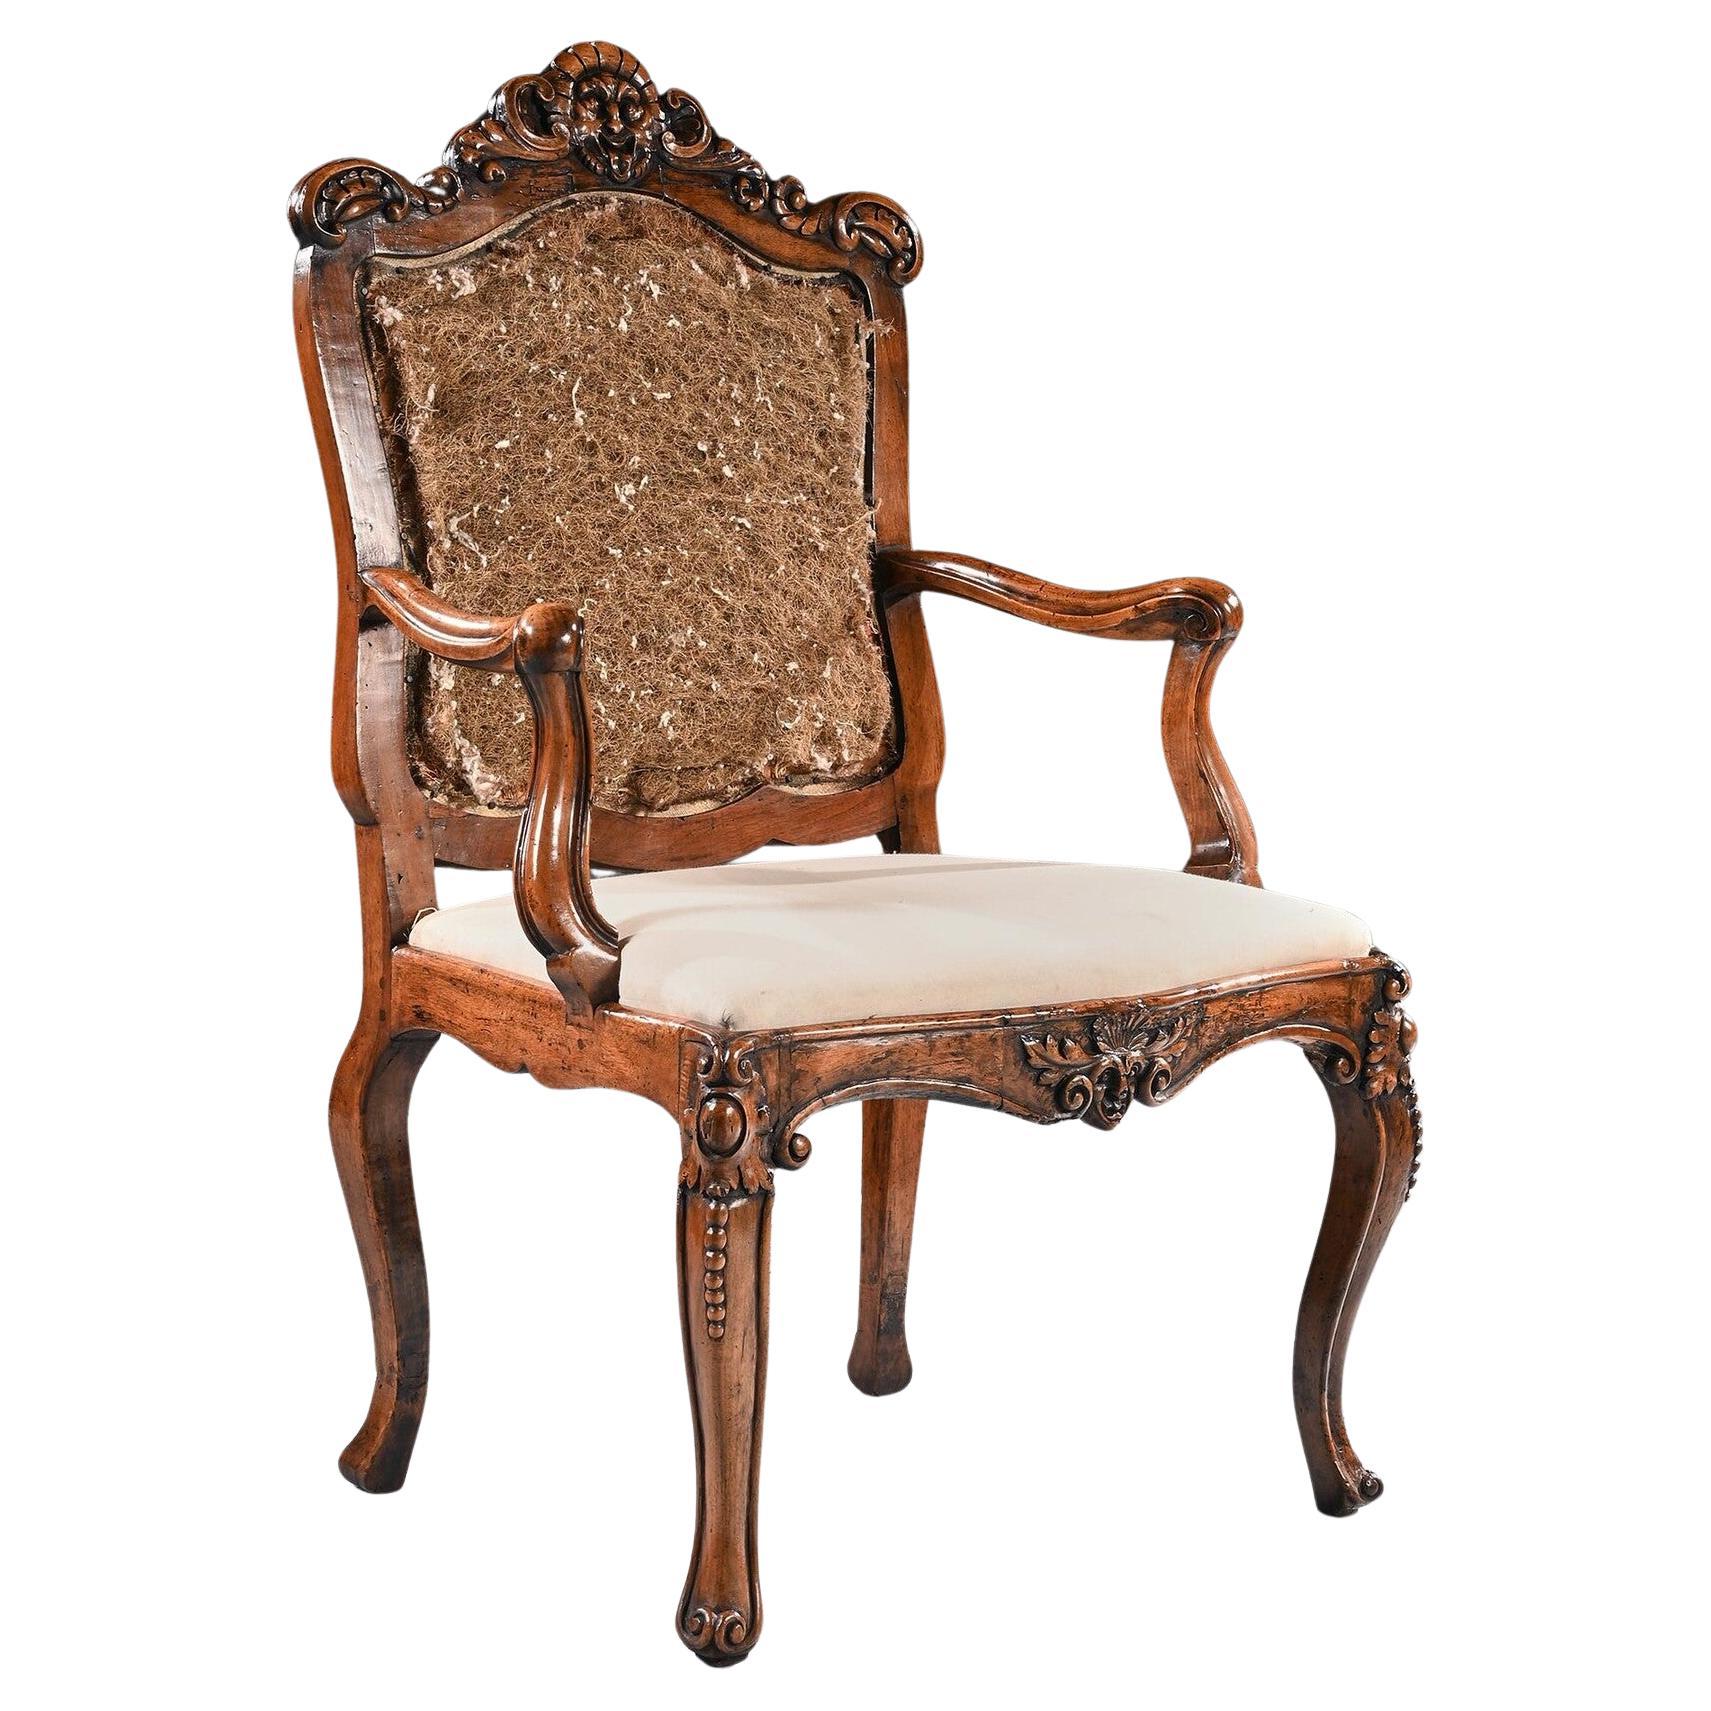 Mid 18th Century Italian Rococo Armchair in Walnut With Extravagantly Carved For Sale